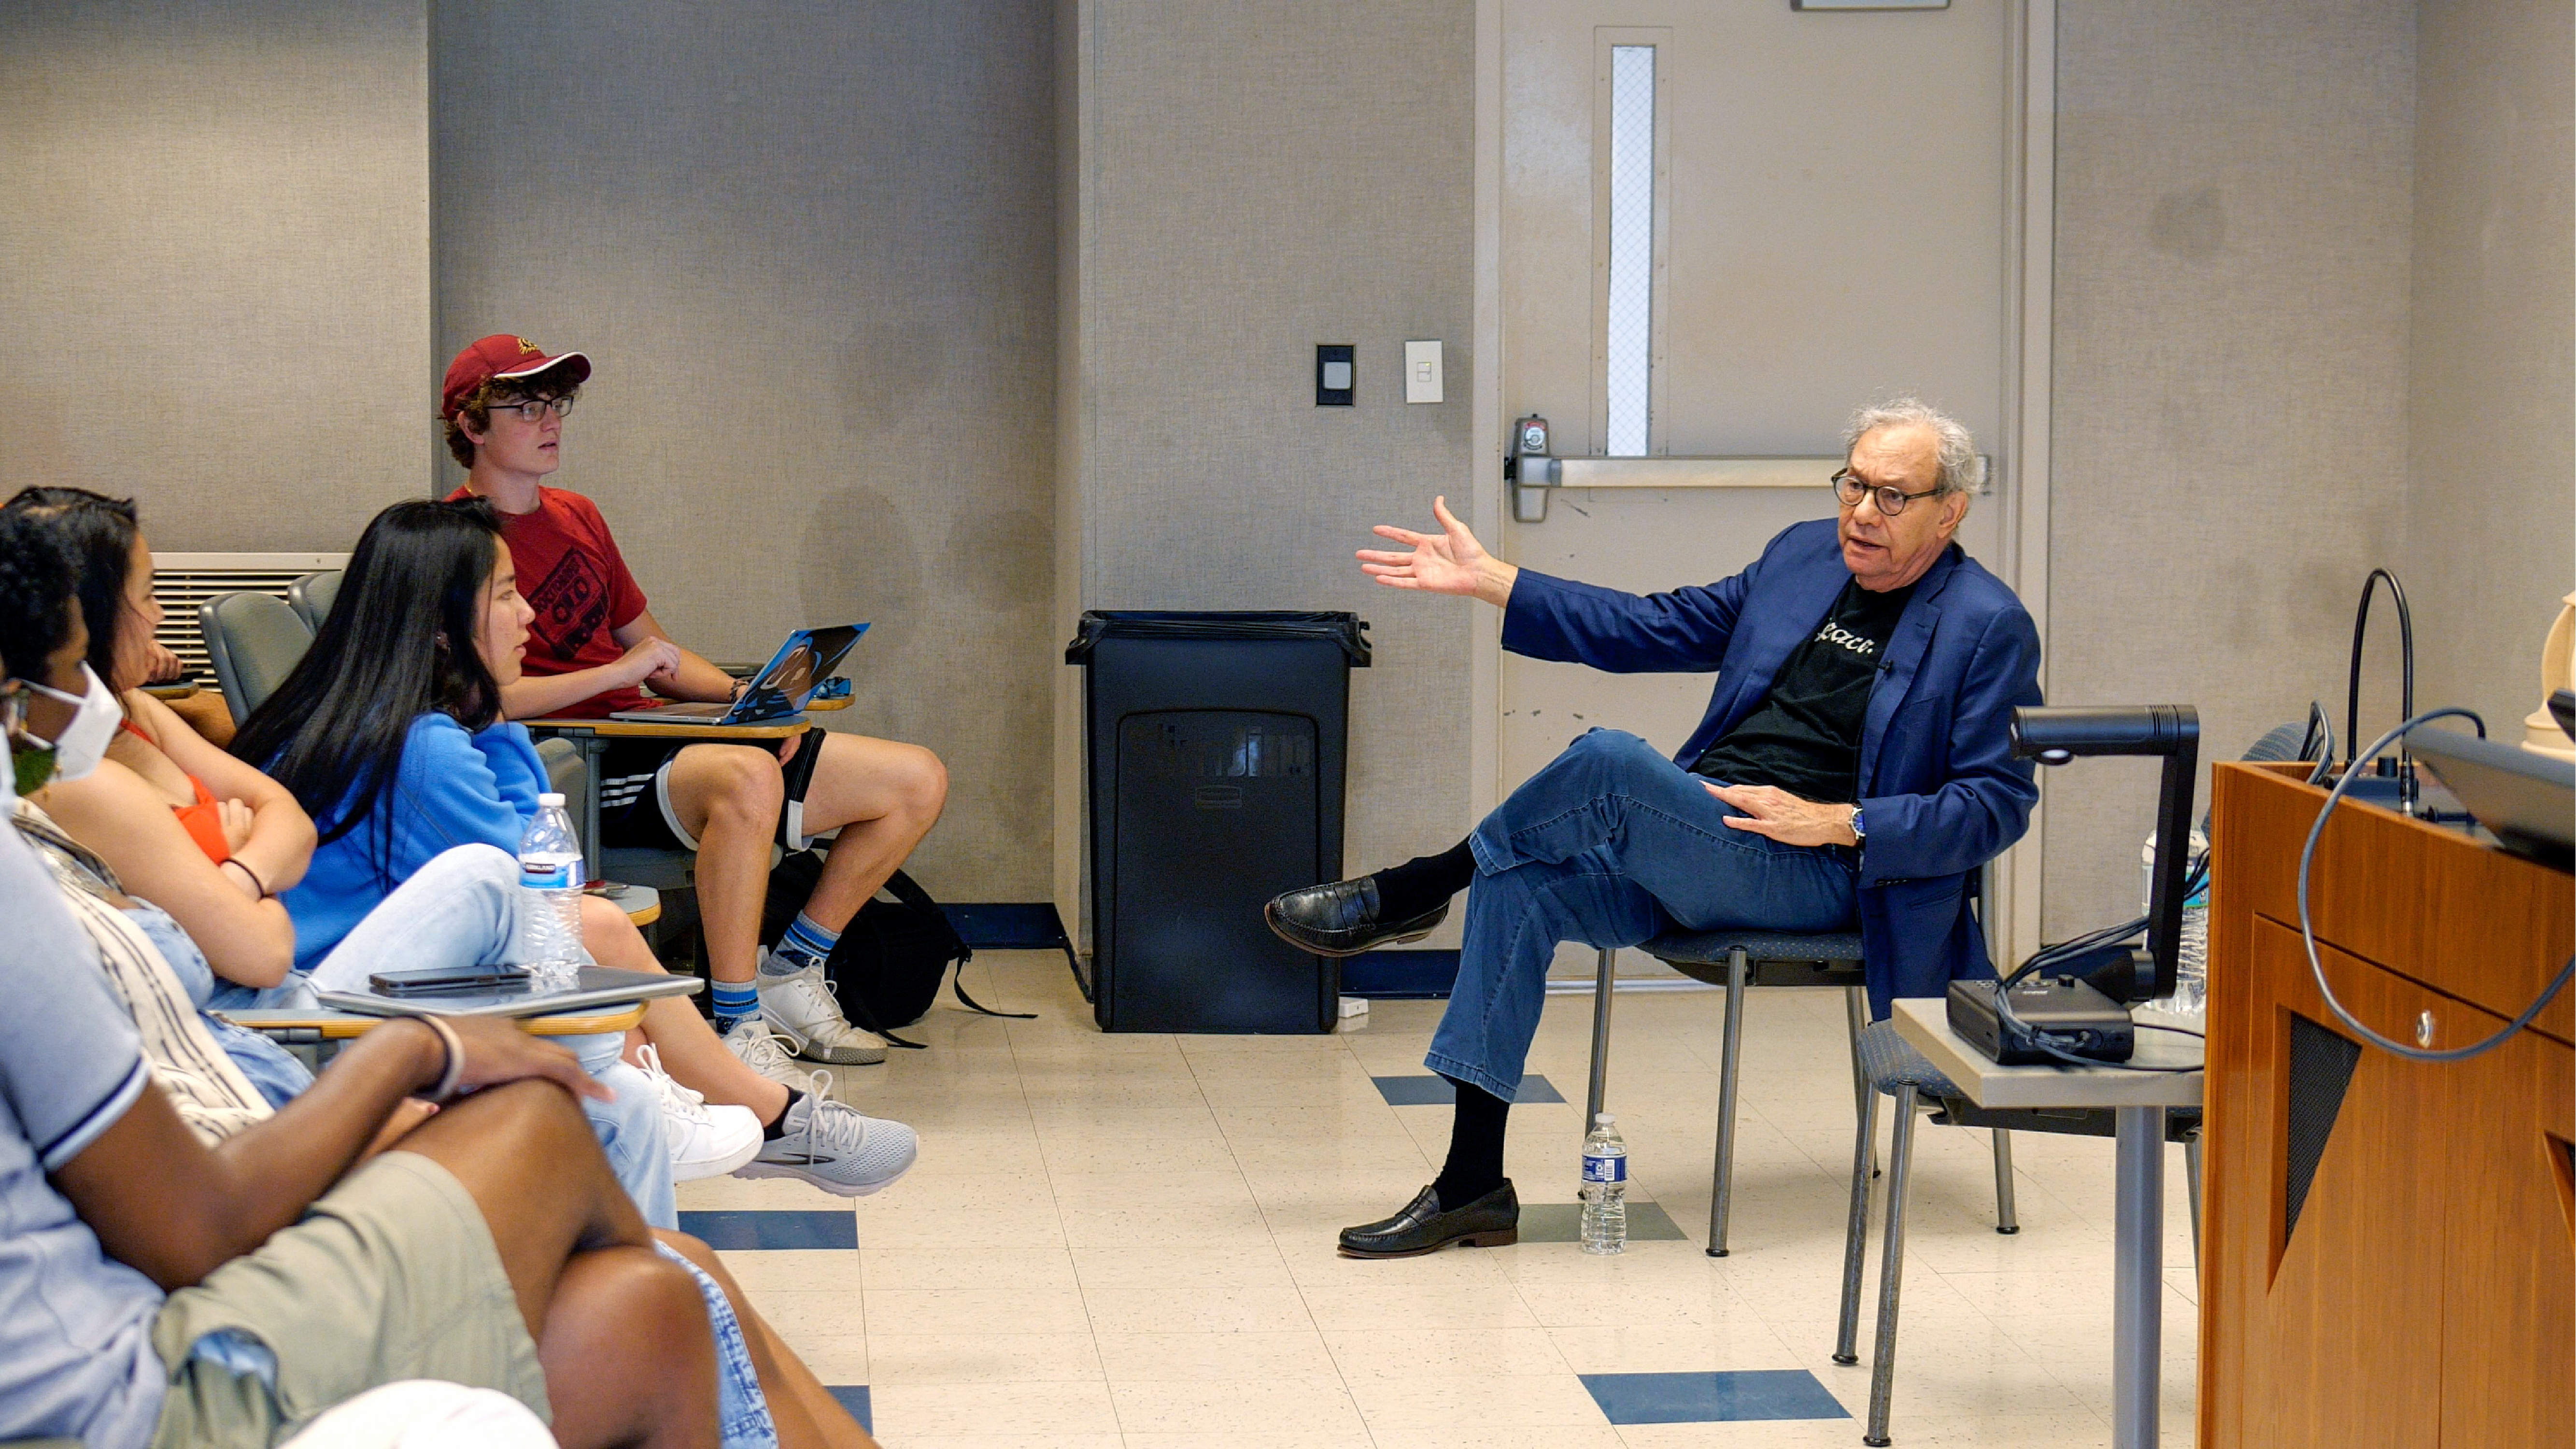 Lewis Black returns to the classroom after donating papers to University Libraries